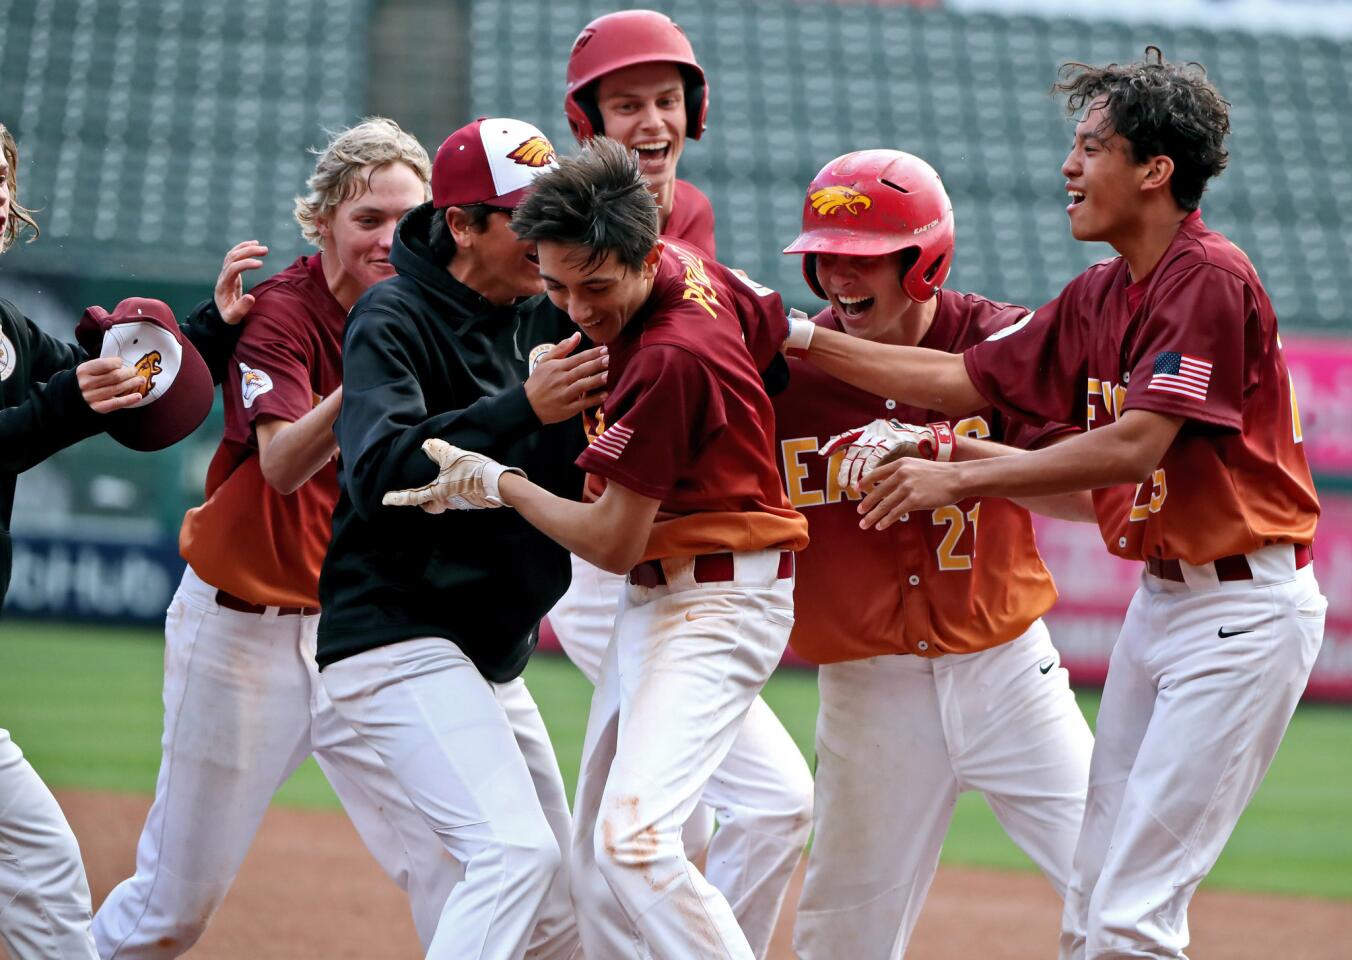 Estancia High's Nick Peralez, center, is mobbed by teammates after his walk-off hit in the bottom of the seventh inning lifted the Eagles to a 4-3 win over rival Costa Mesa in the Halo Classic at Angel Stadium on Wednesday.